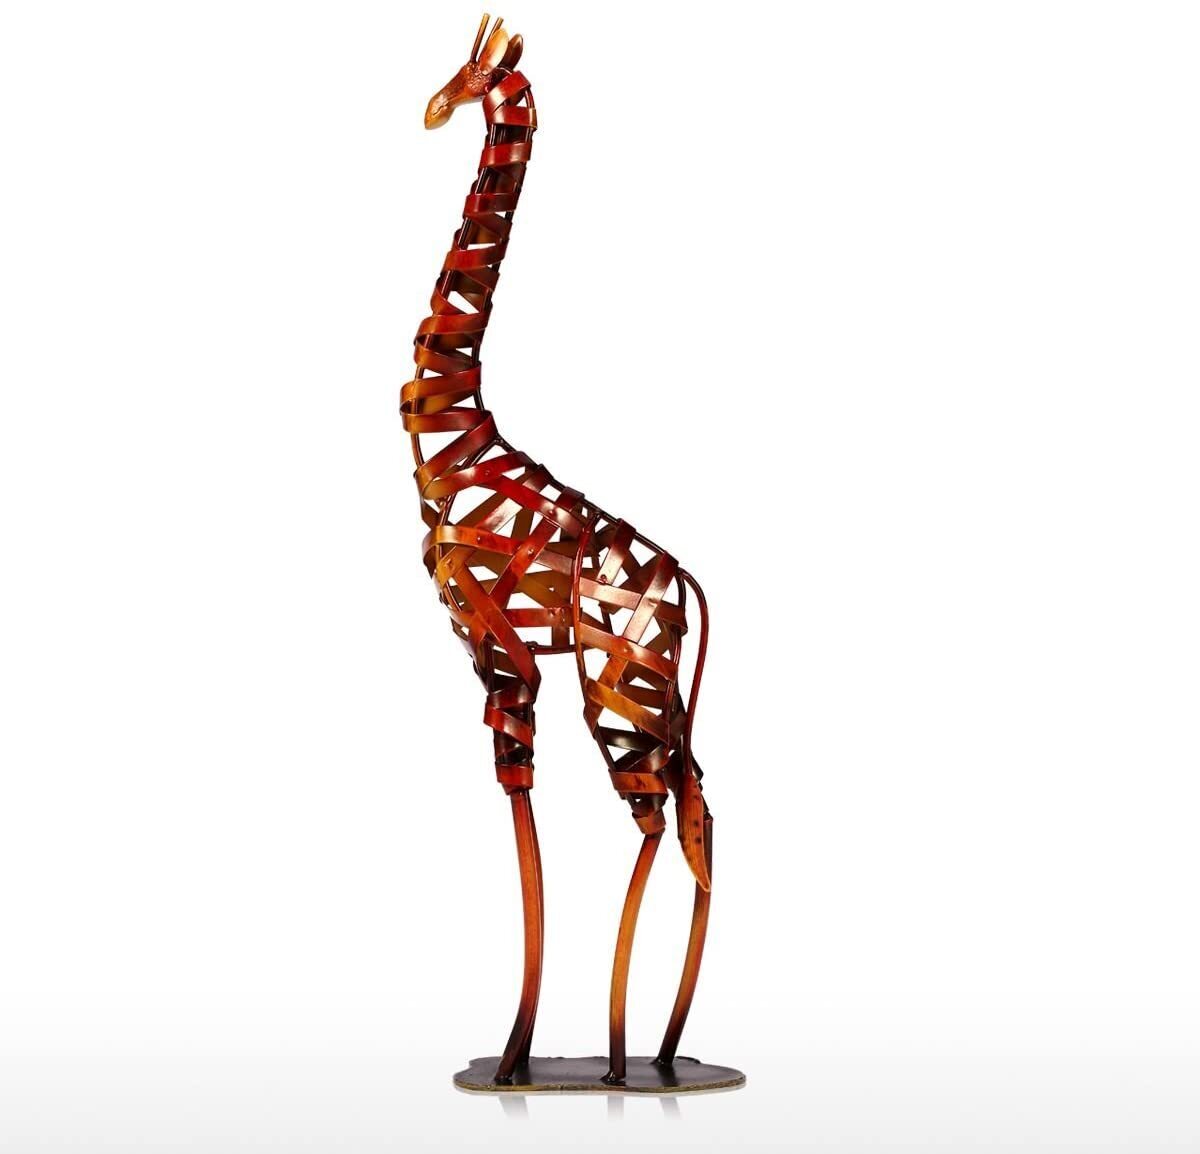 Pair Of Gold Colour Romany Tall Giraffi Animal Ornament For Home Decor Gift 